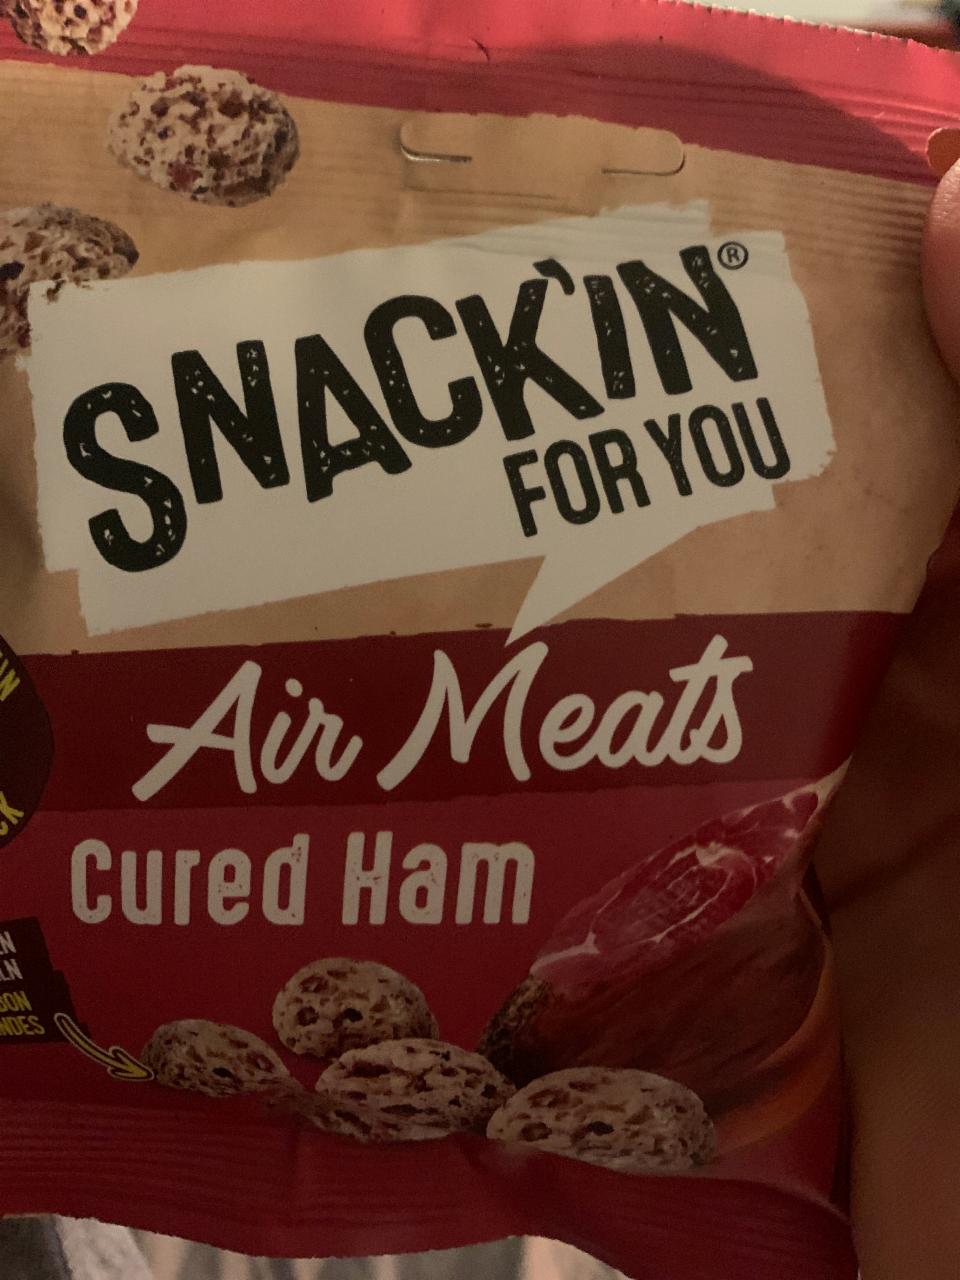 Fotografie - Air Meats Cured Ham Snackin' for you